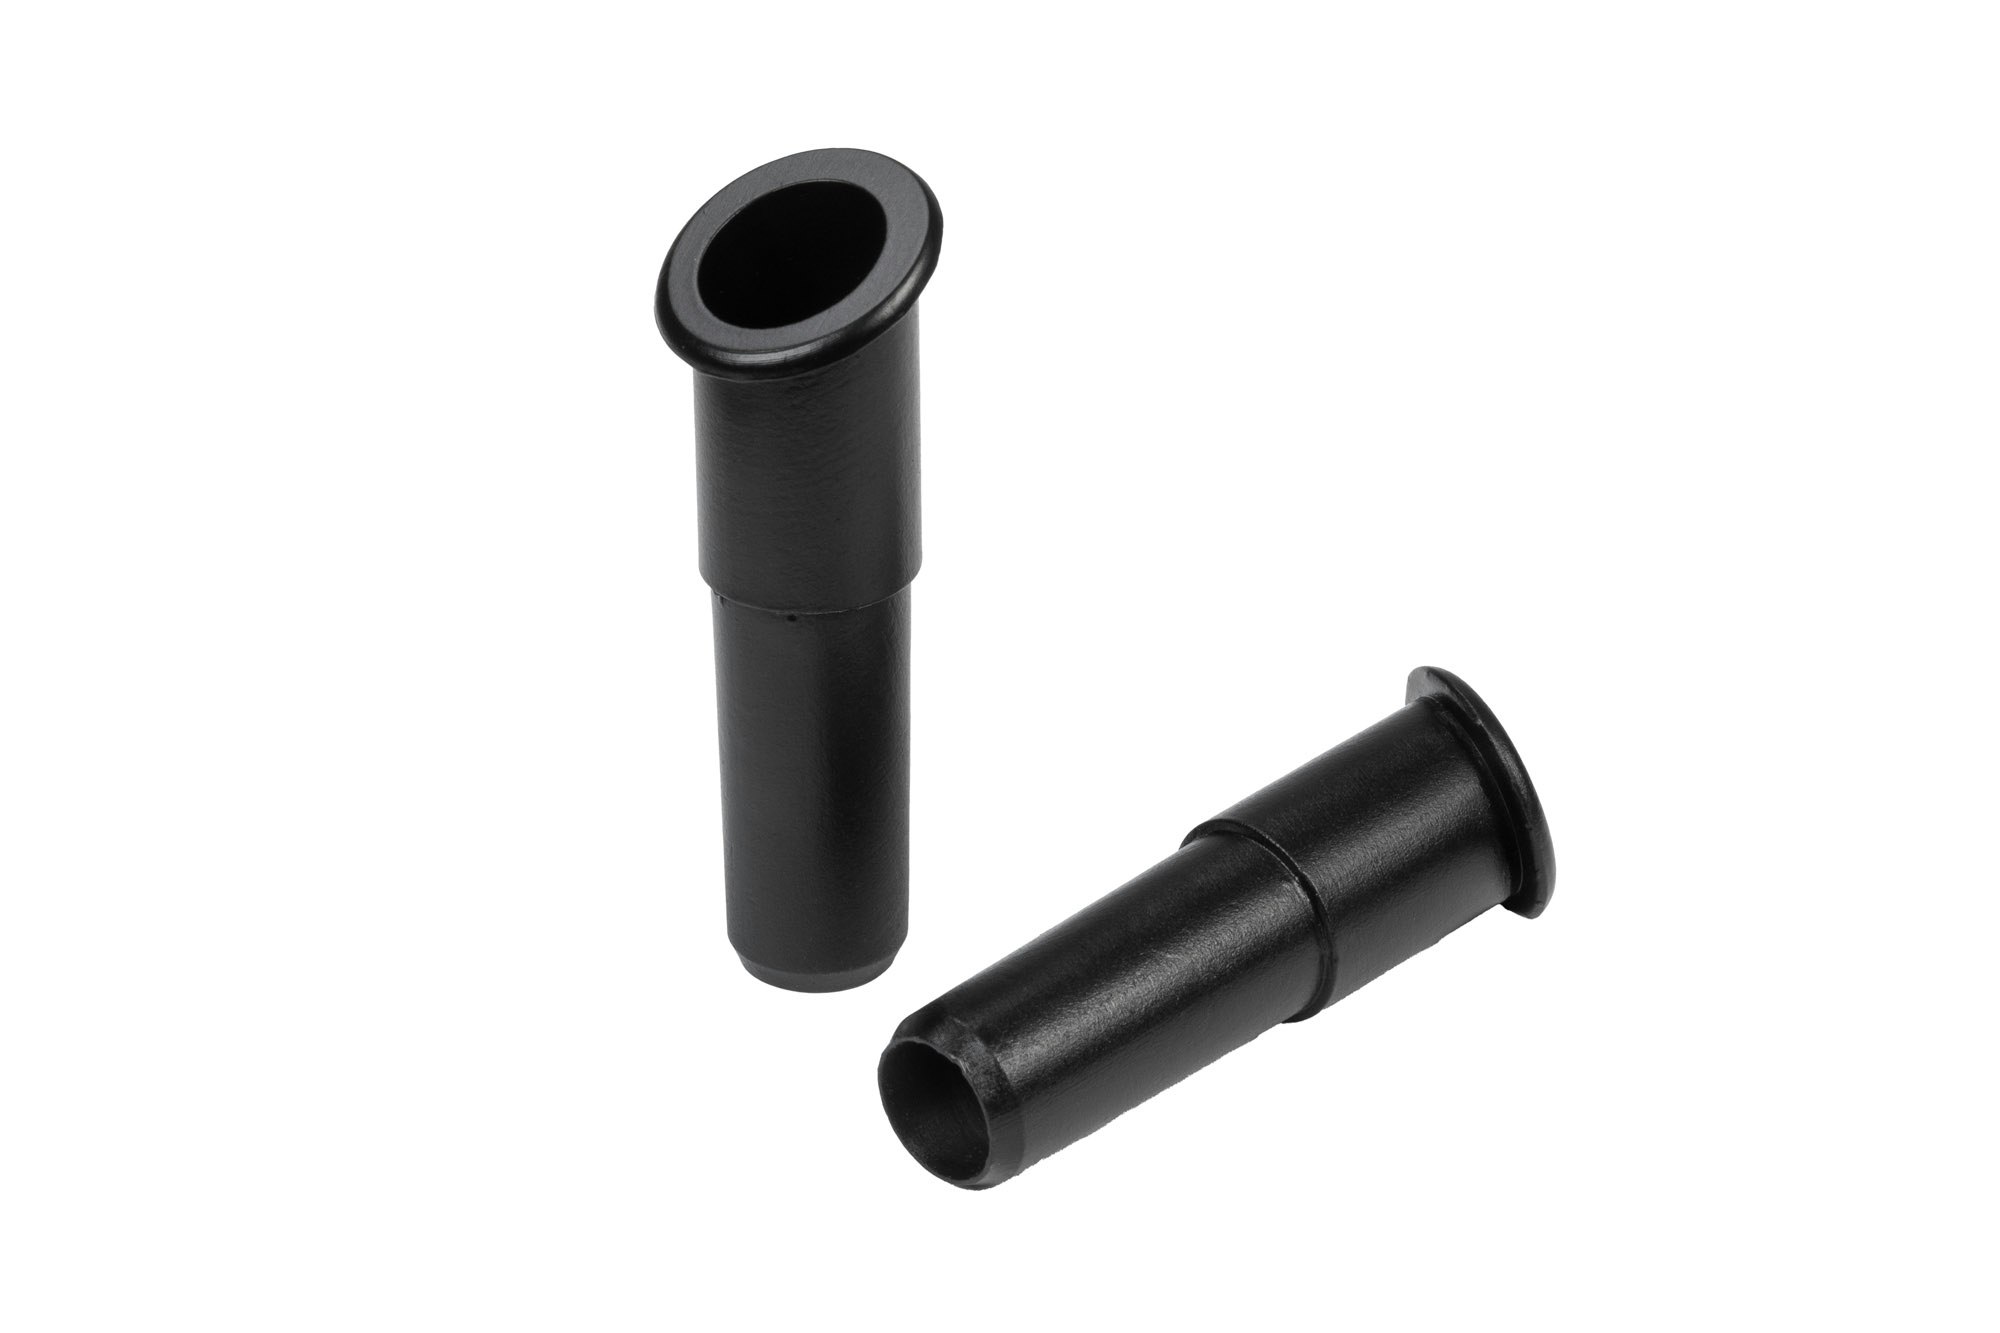 Defroster nozzles for Dash Pad for Saab 95, 96. Fits year model 1960-1980. Color: Black.